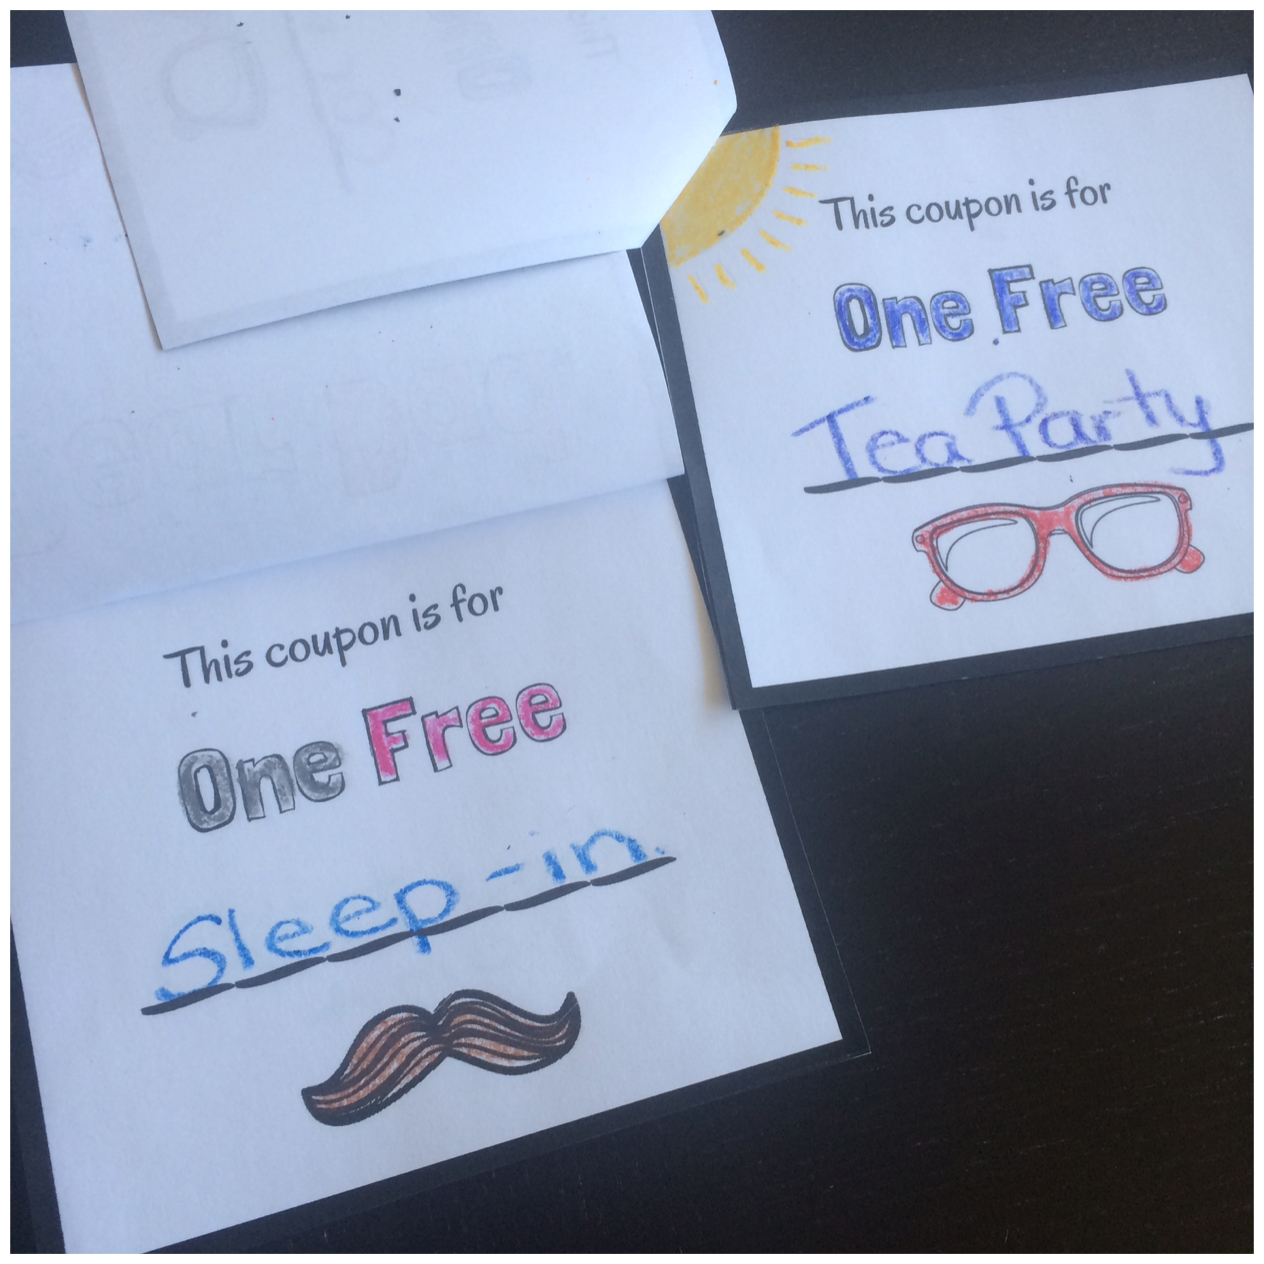 This is an adorable Father's Day coupon booklet activity. Students will get to create and design coupons to give to their dads. This is a great way to encourage kids to think about the ways they can show appreciation to their fathers, and will promote some at-home action for Father's Day. 